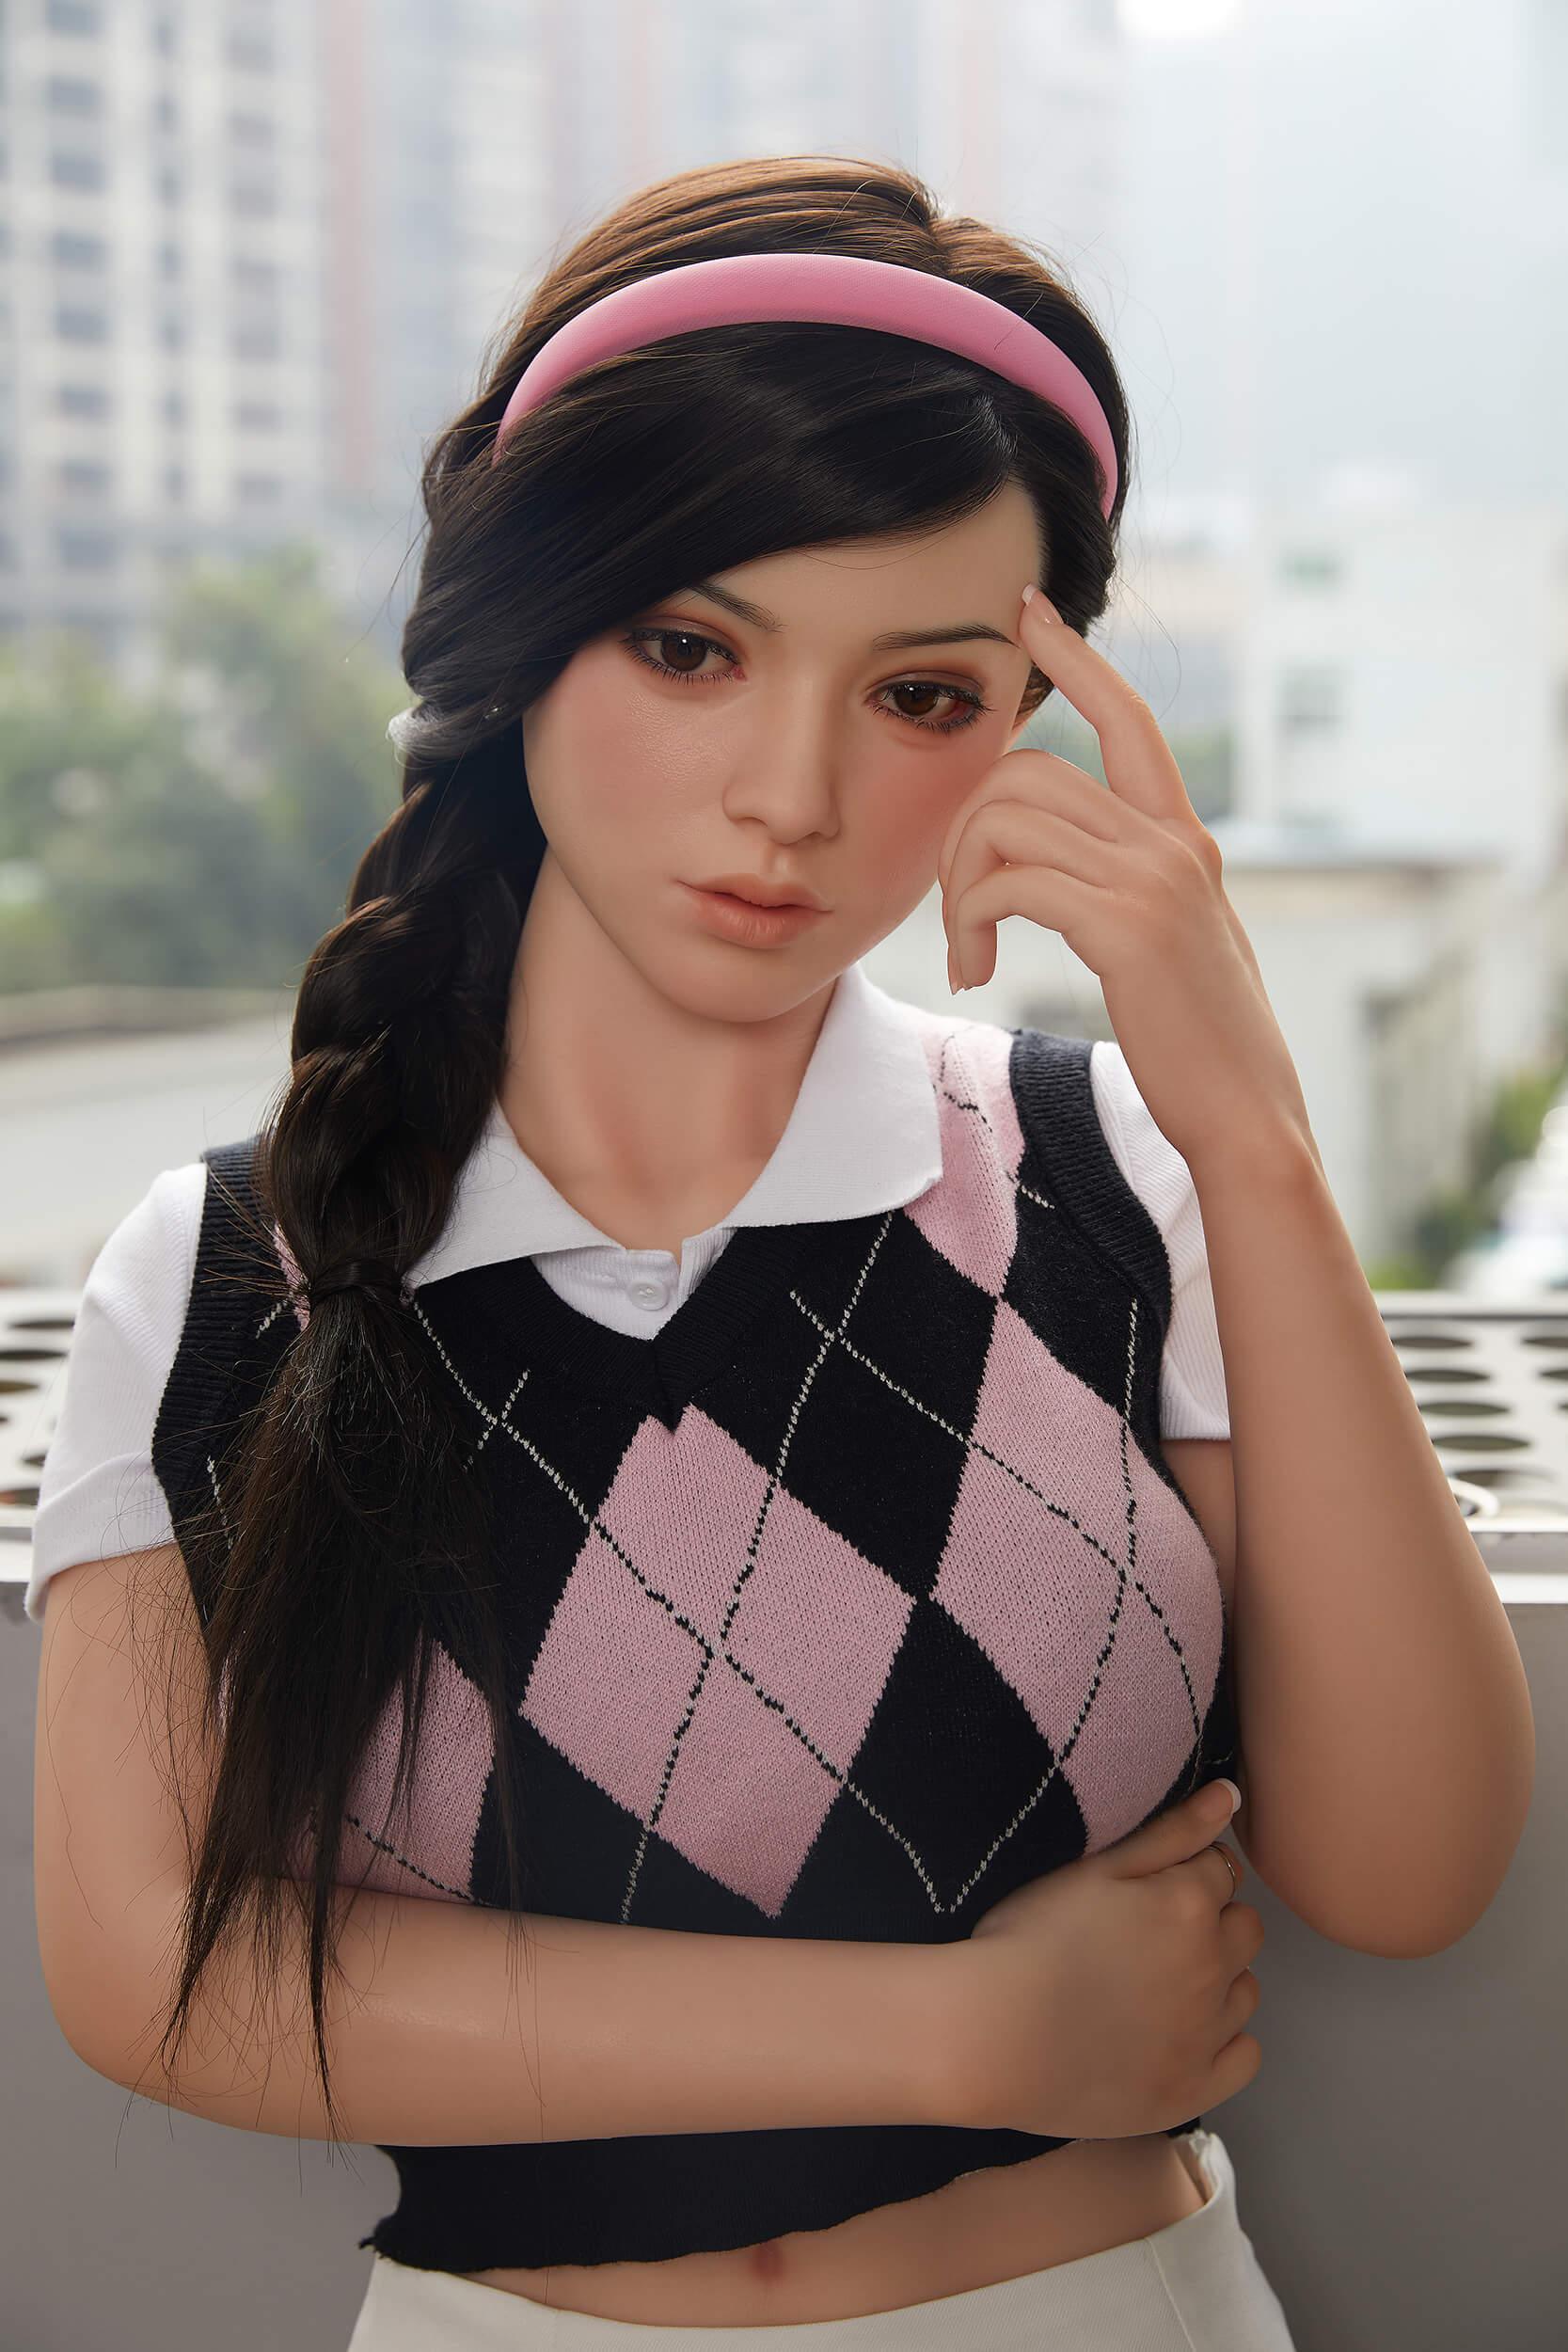 Cutie Silicone Sex Doll Christina-160cm 5ft3 D CUP - USbbdoll